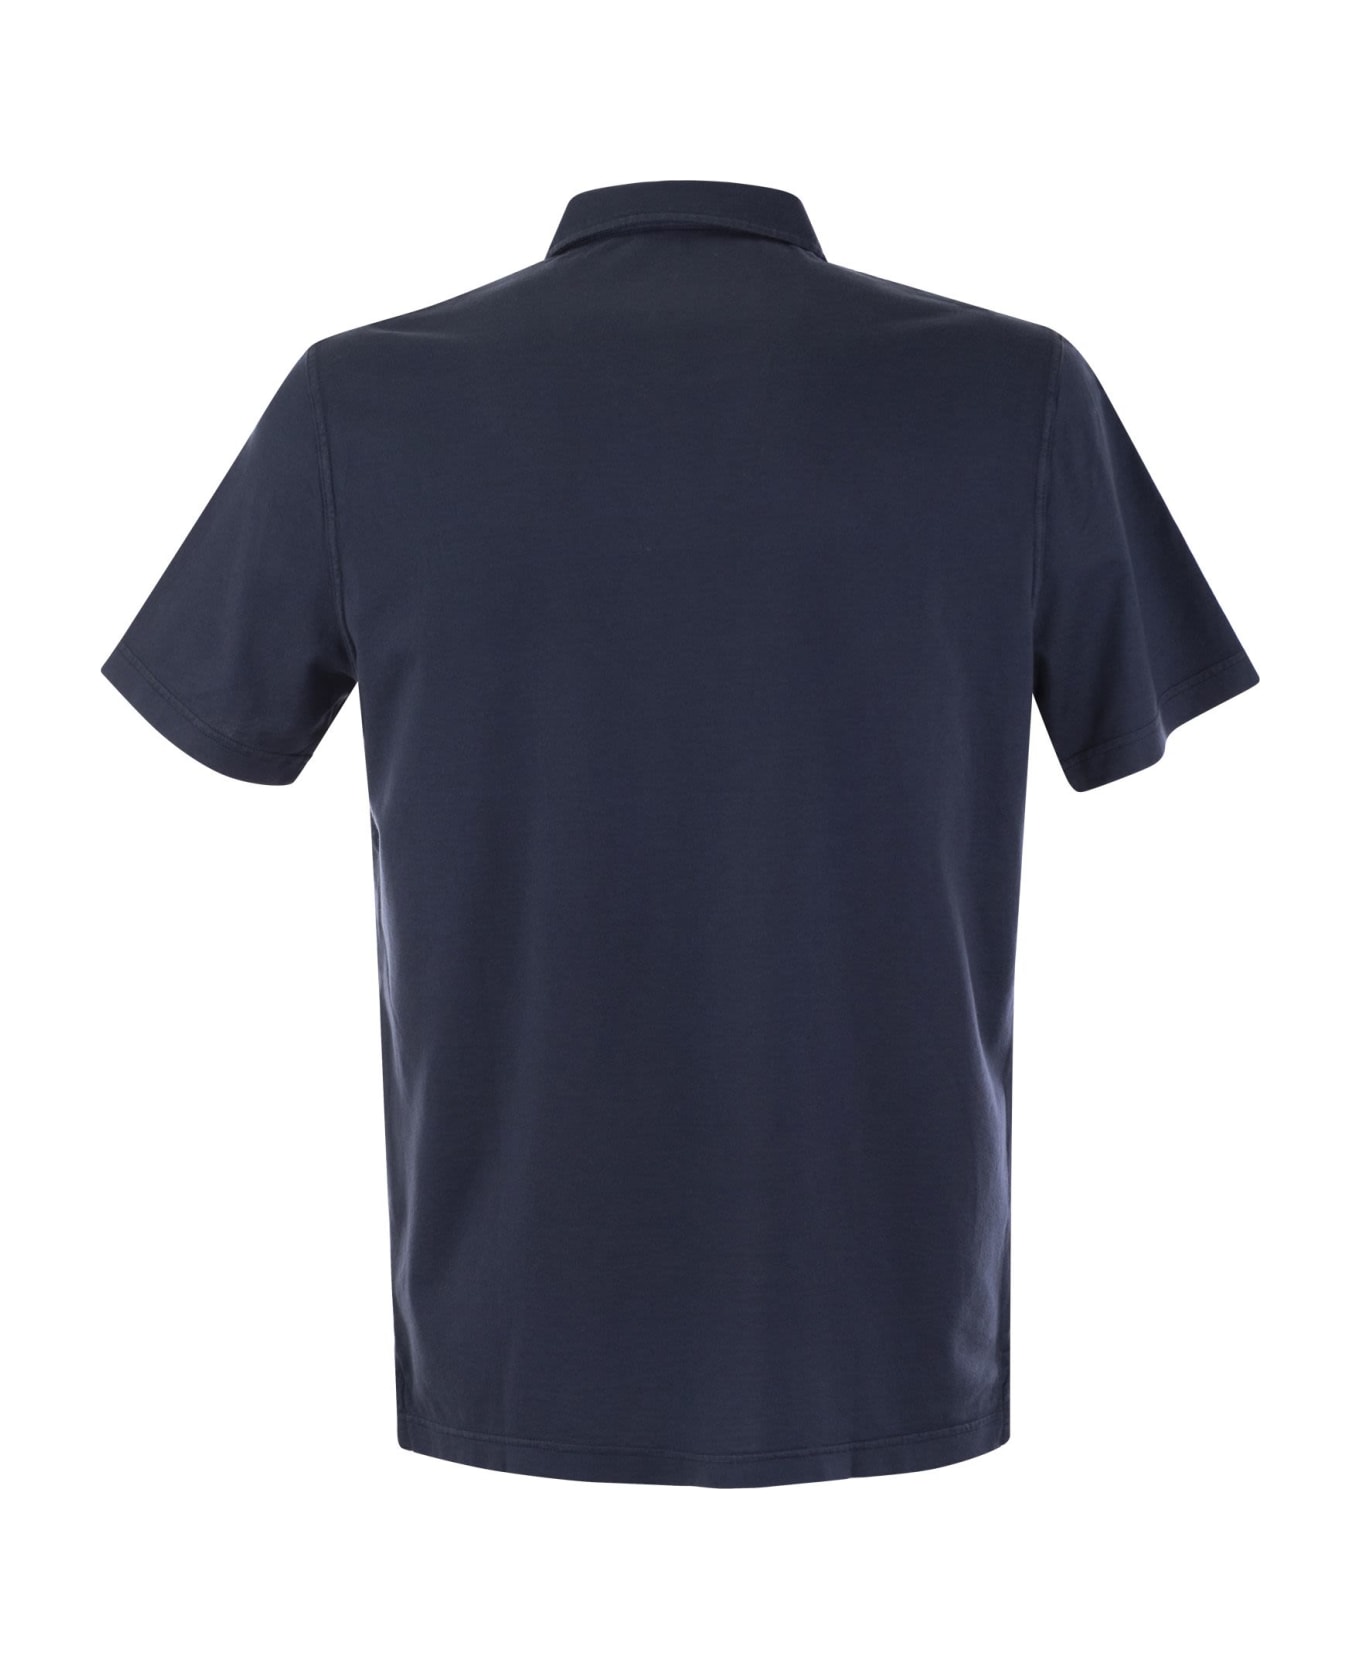 Fedeli Cotton Polo Shirt With Open Collar - Blu ポロシャツ